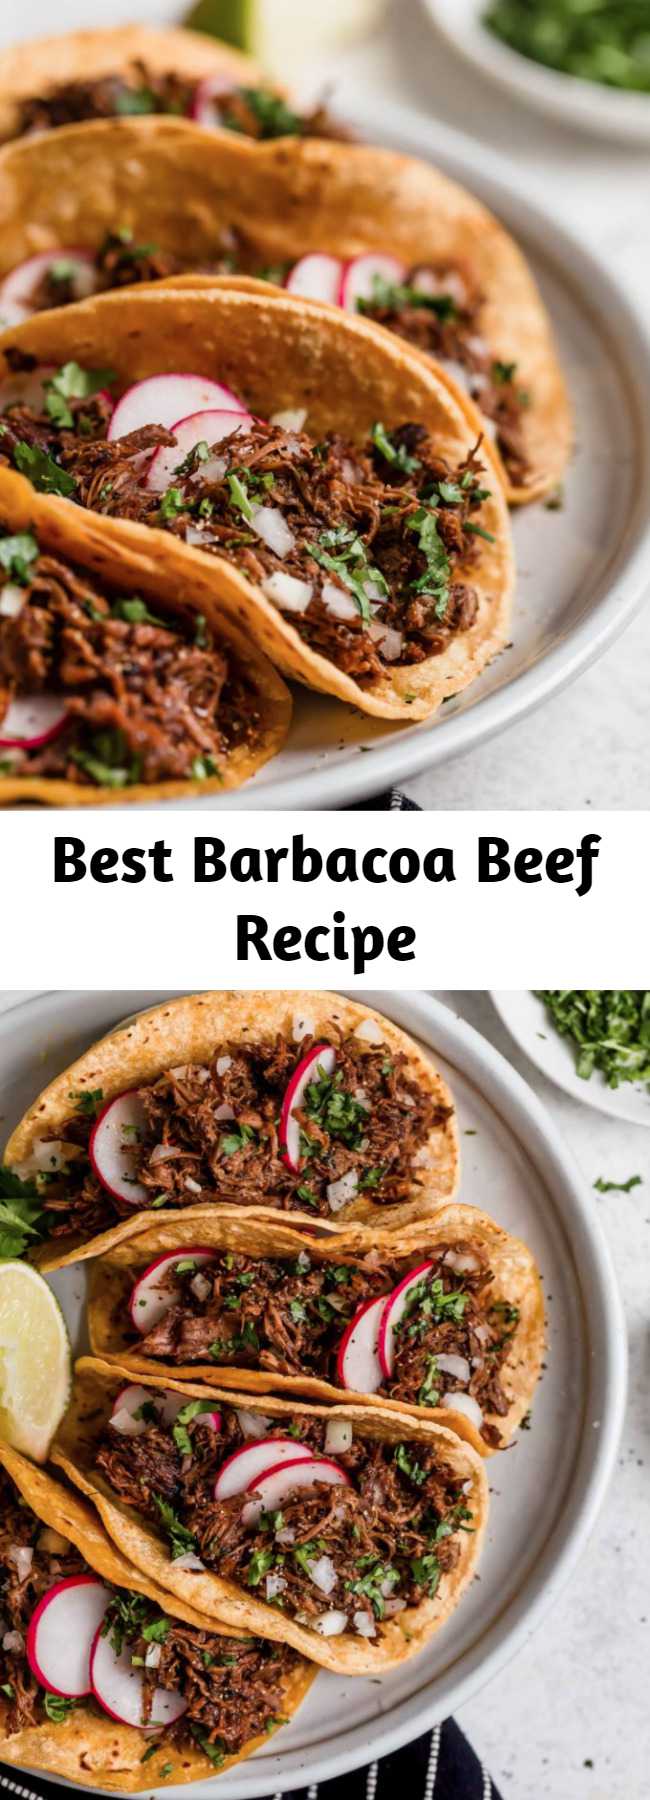 Best Barbacoa Beef Recipe - The best Barbacoa Beef recipe! This flavorful meat is deliciously seasoned and cooked low and slow until perfectly tender. Layer it in tortillas with all your favorite toppings for a crave-worthy dinner! #barbacoa #beef #tacos #mexicanrecipe